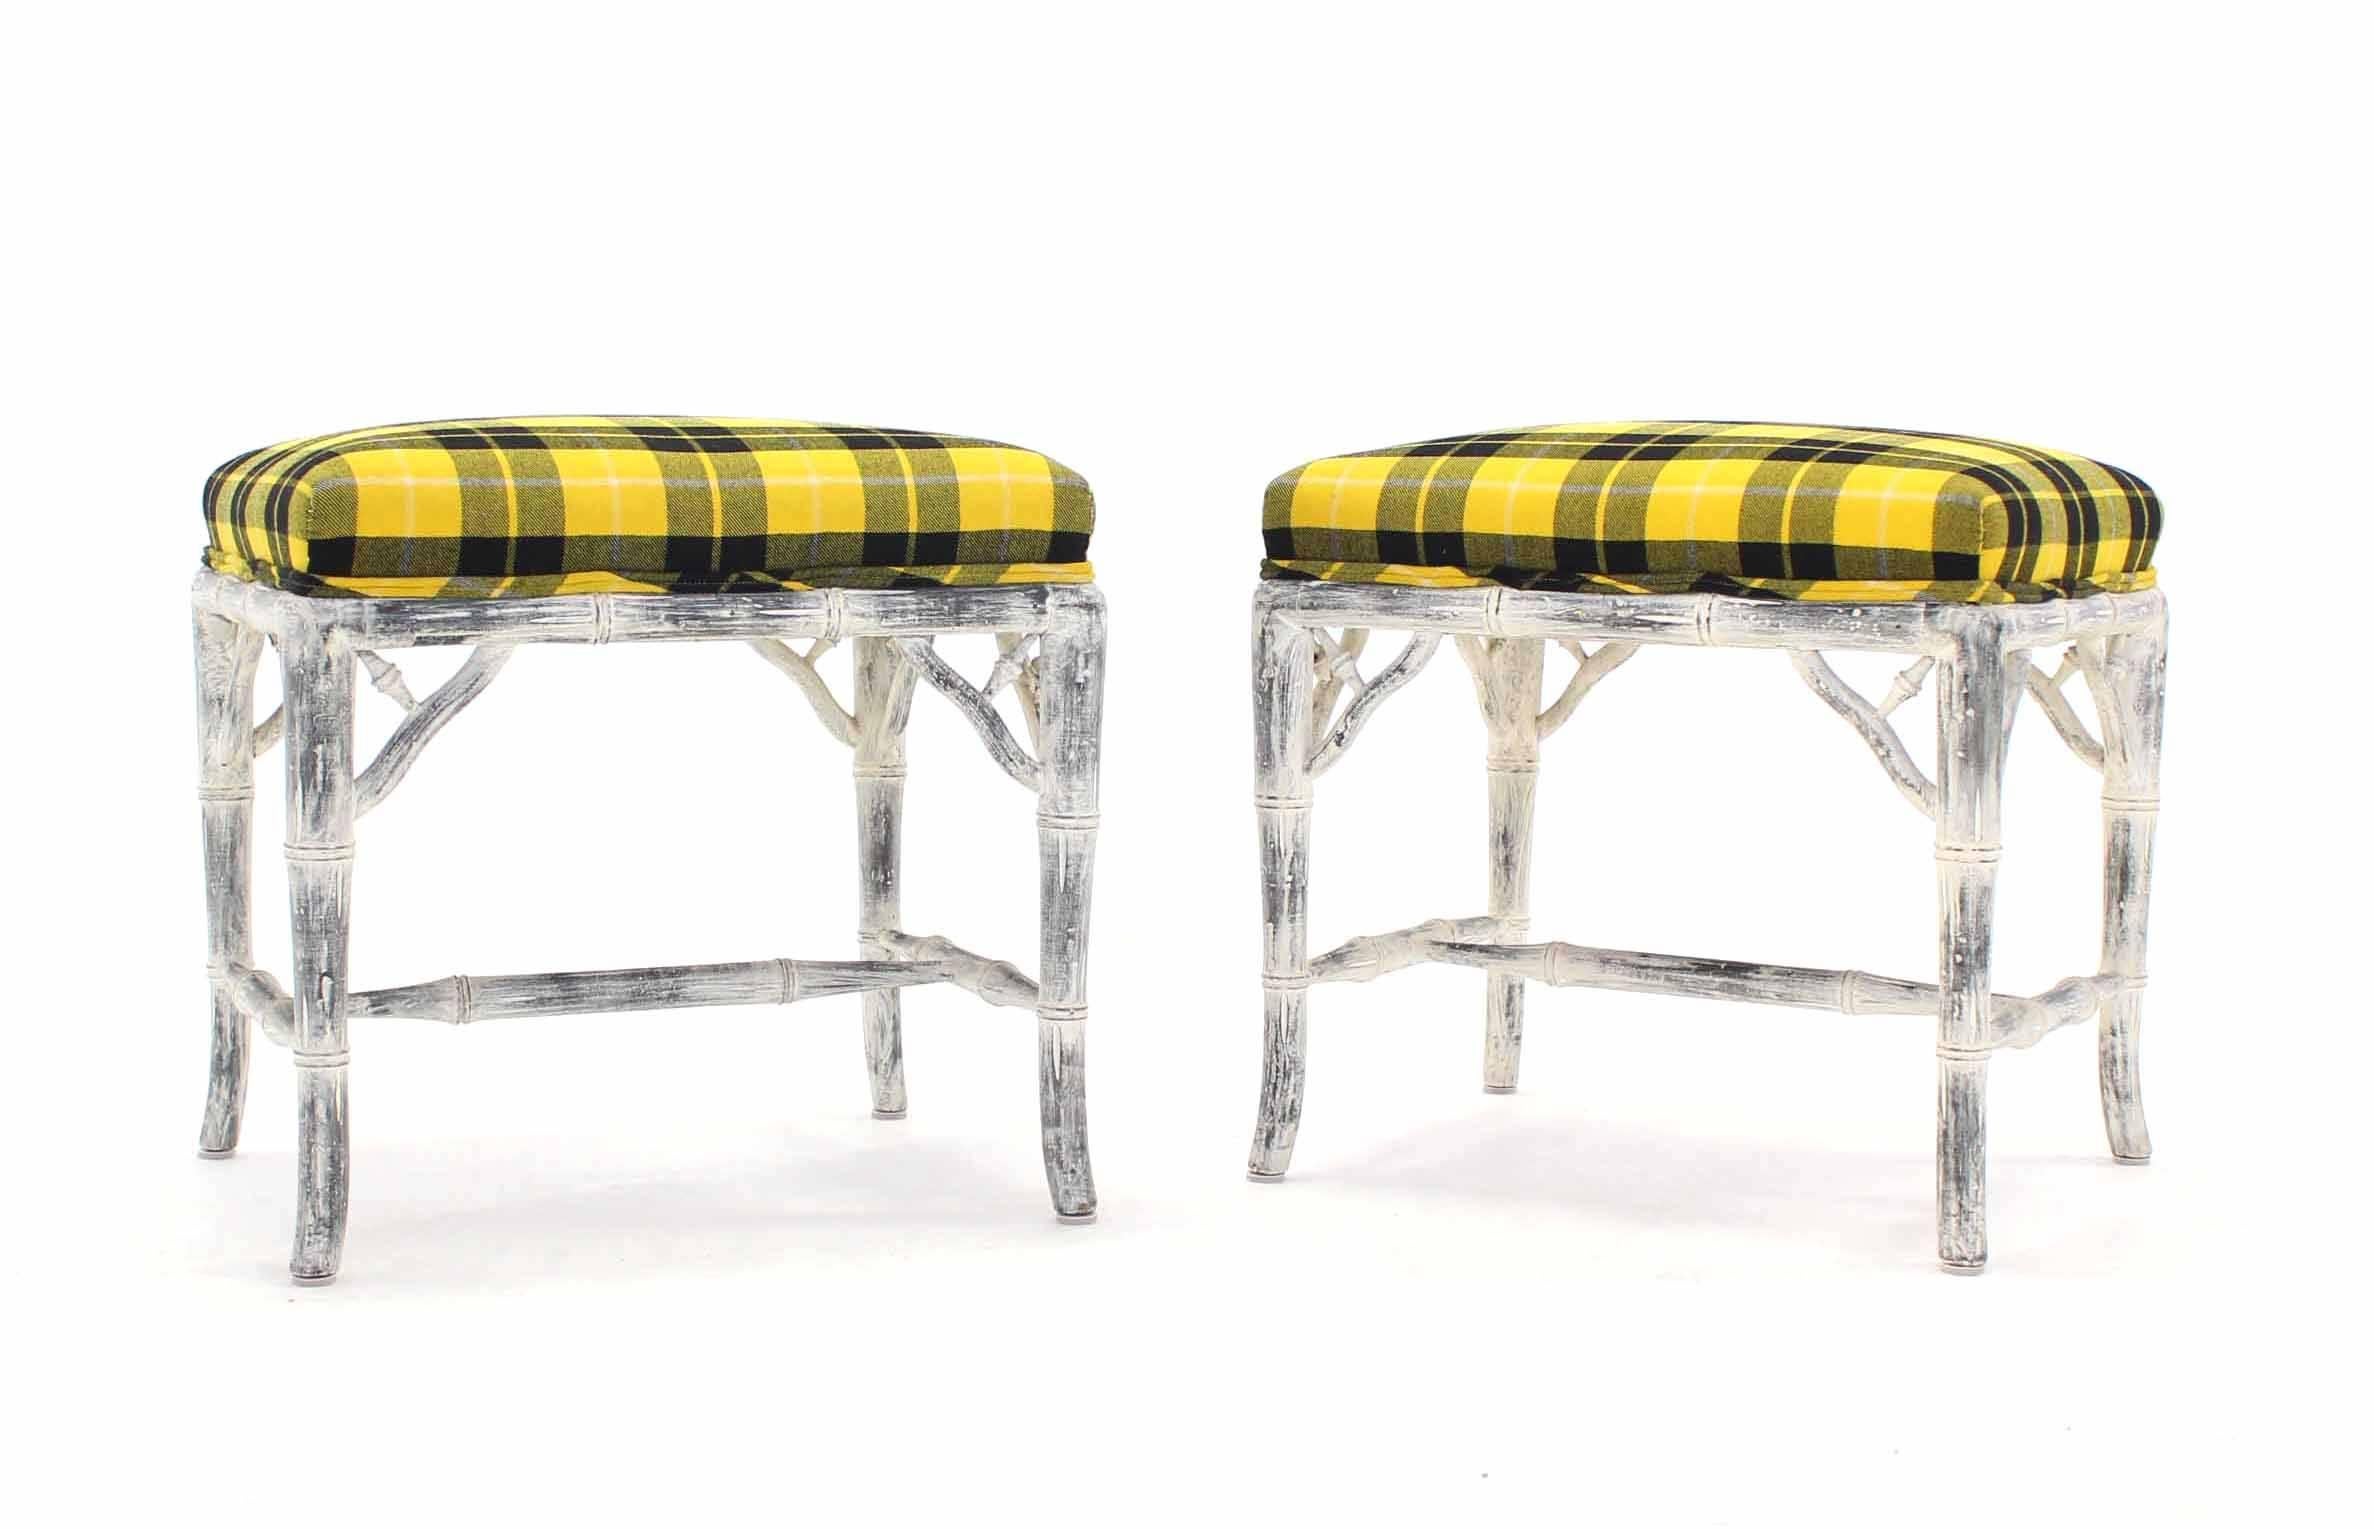 Pair of mid century modern white wash painted faux bamboo benches.